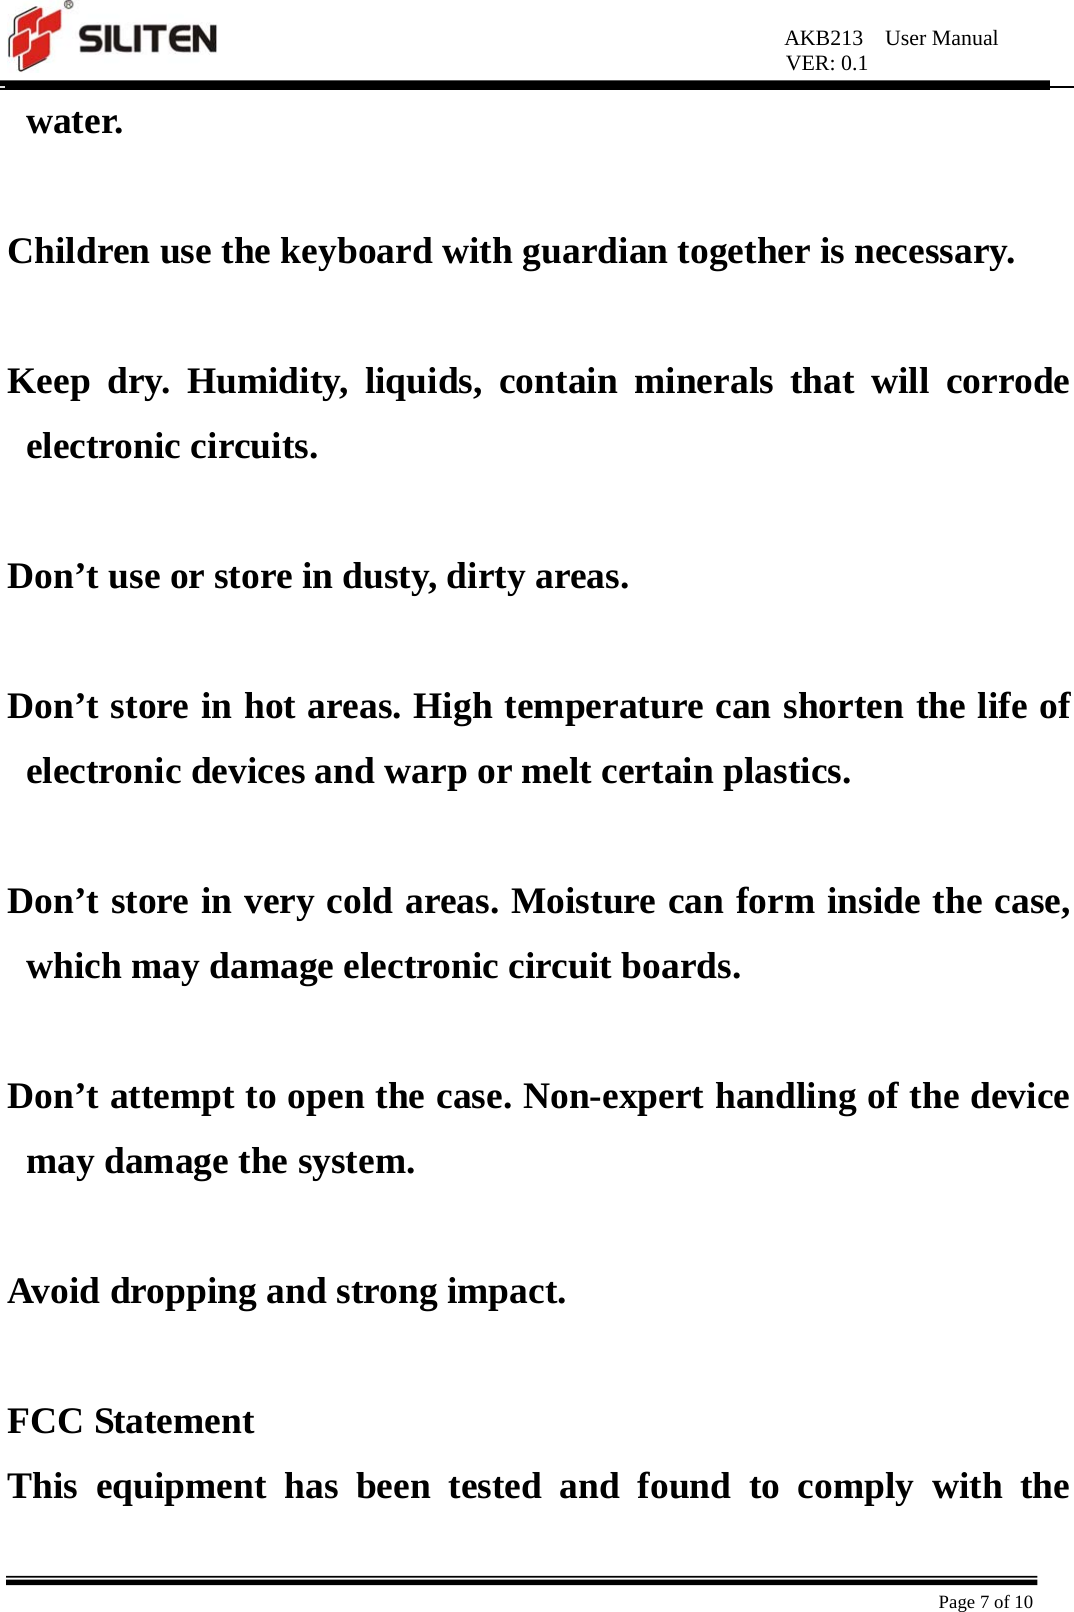 AKB213  User Manual VER: 0.1  Page 7 of 10 water.  Children use the keyboard with guardian together is necessary.  Keep dry. Humidity, liquids, contain minerals that will corrode electronic circuits.  Don’t use or store in dusty, dirty areas.  Don’t store in hot areas. High temperature can shorten the life of electronic devices and warp or melt certain plastics.  Don’t store in very cold areas. Moisture can form inside the case, which may damage electronic circuit boards.  Don’t attempt to open the case. Non-expert handling of the device may damage the system.    Avoid dropping and strong impact.  FCC Statement   This equipment has been tested and found to comply with the 